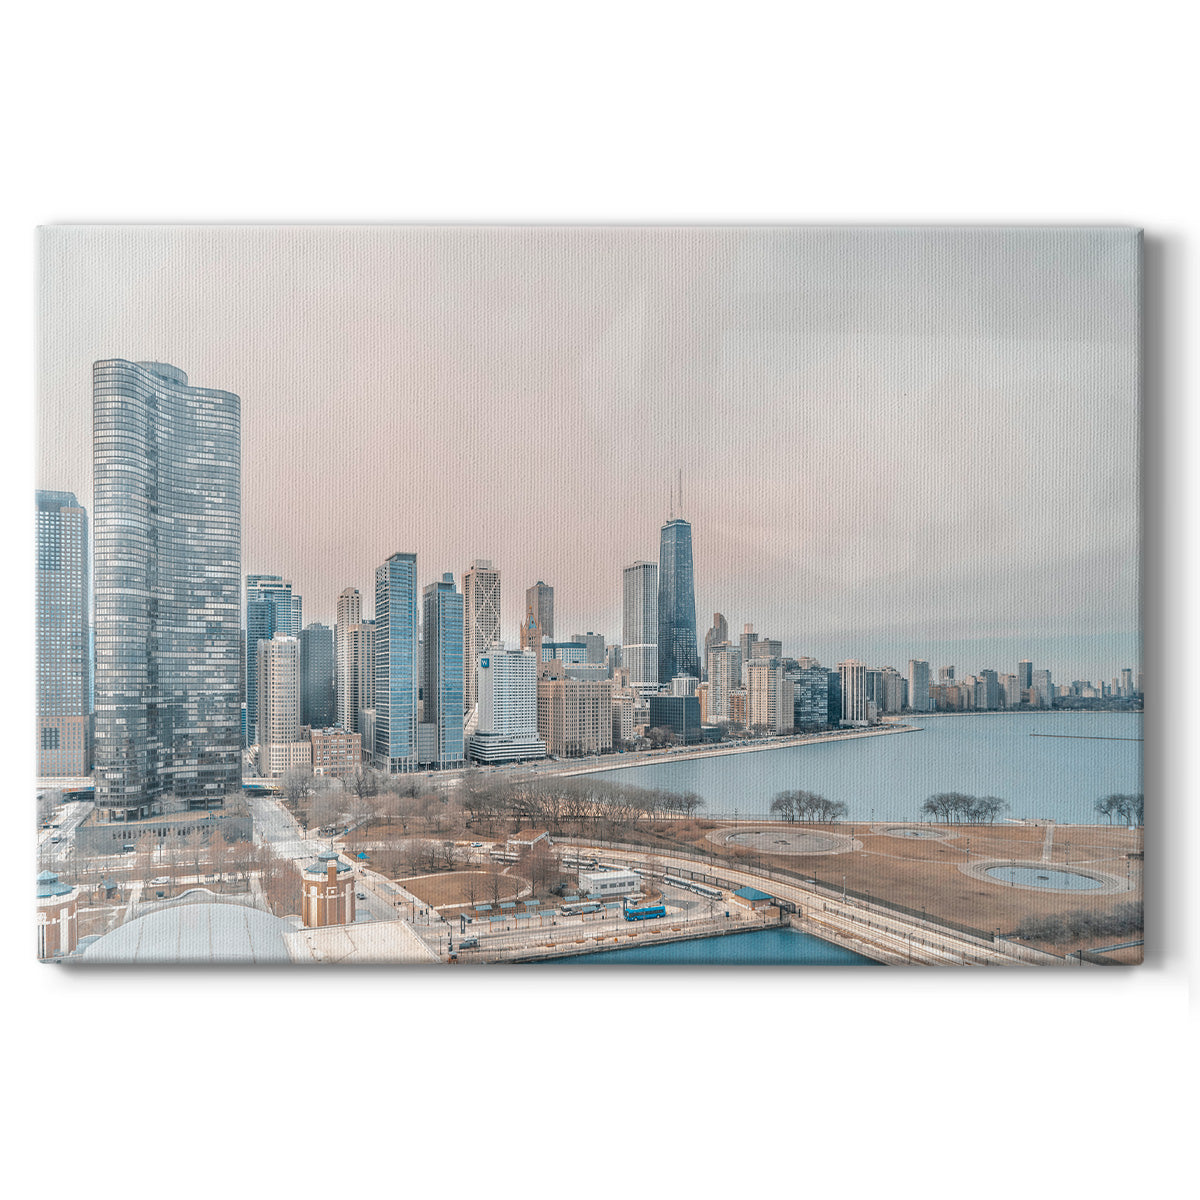 Chicago Skyline from South - Gallery Wrapped Canvas